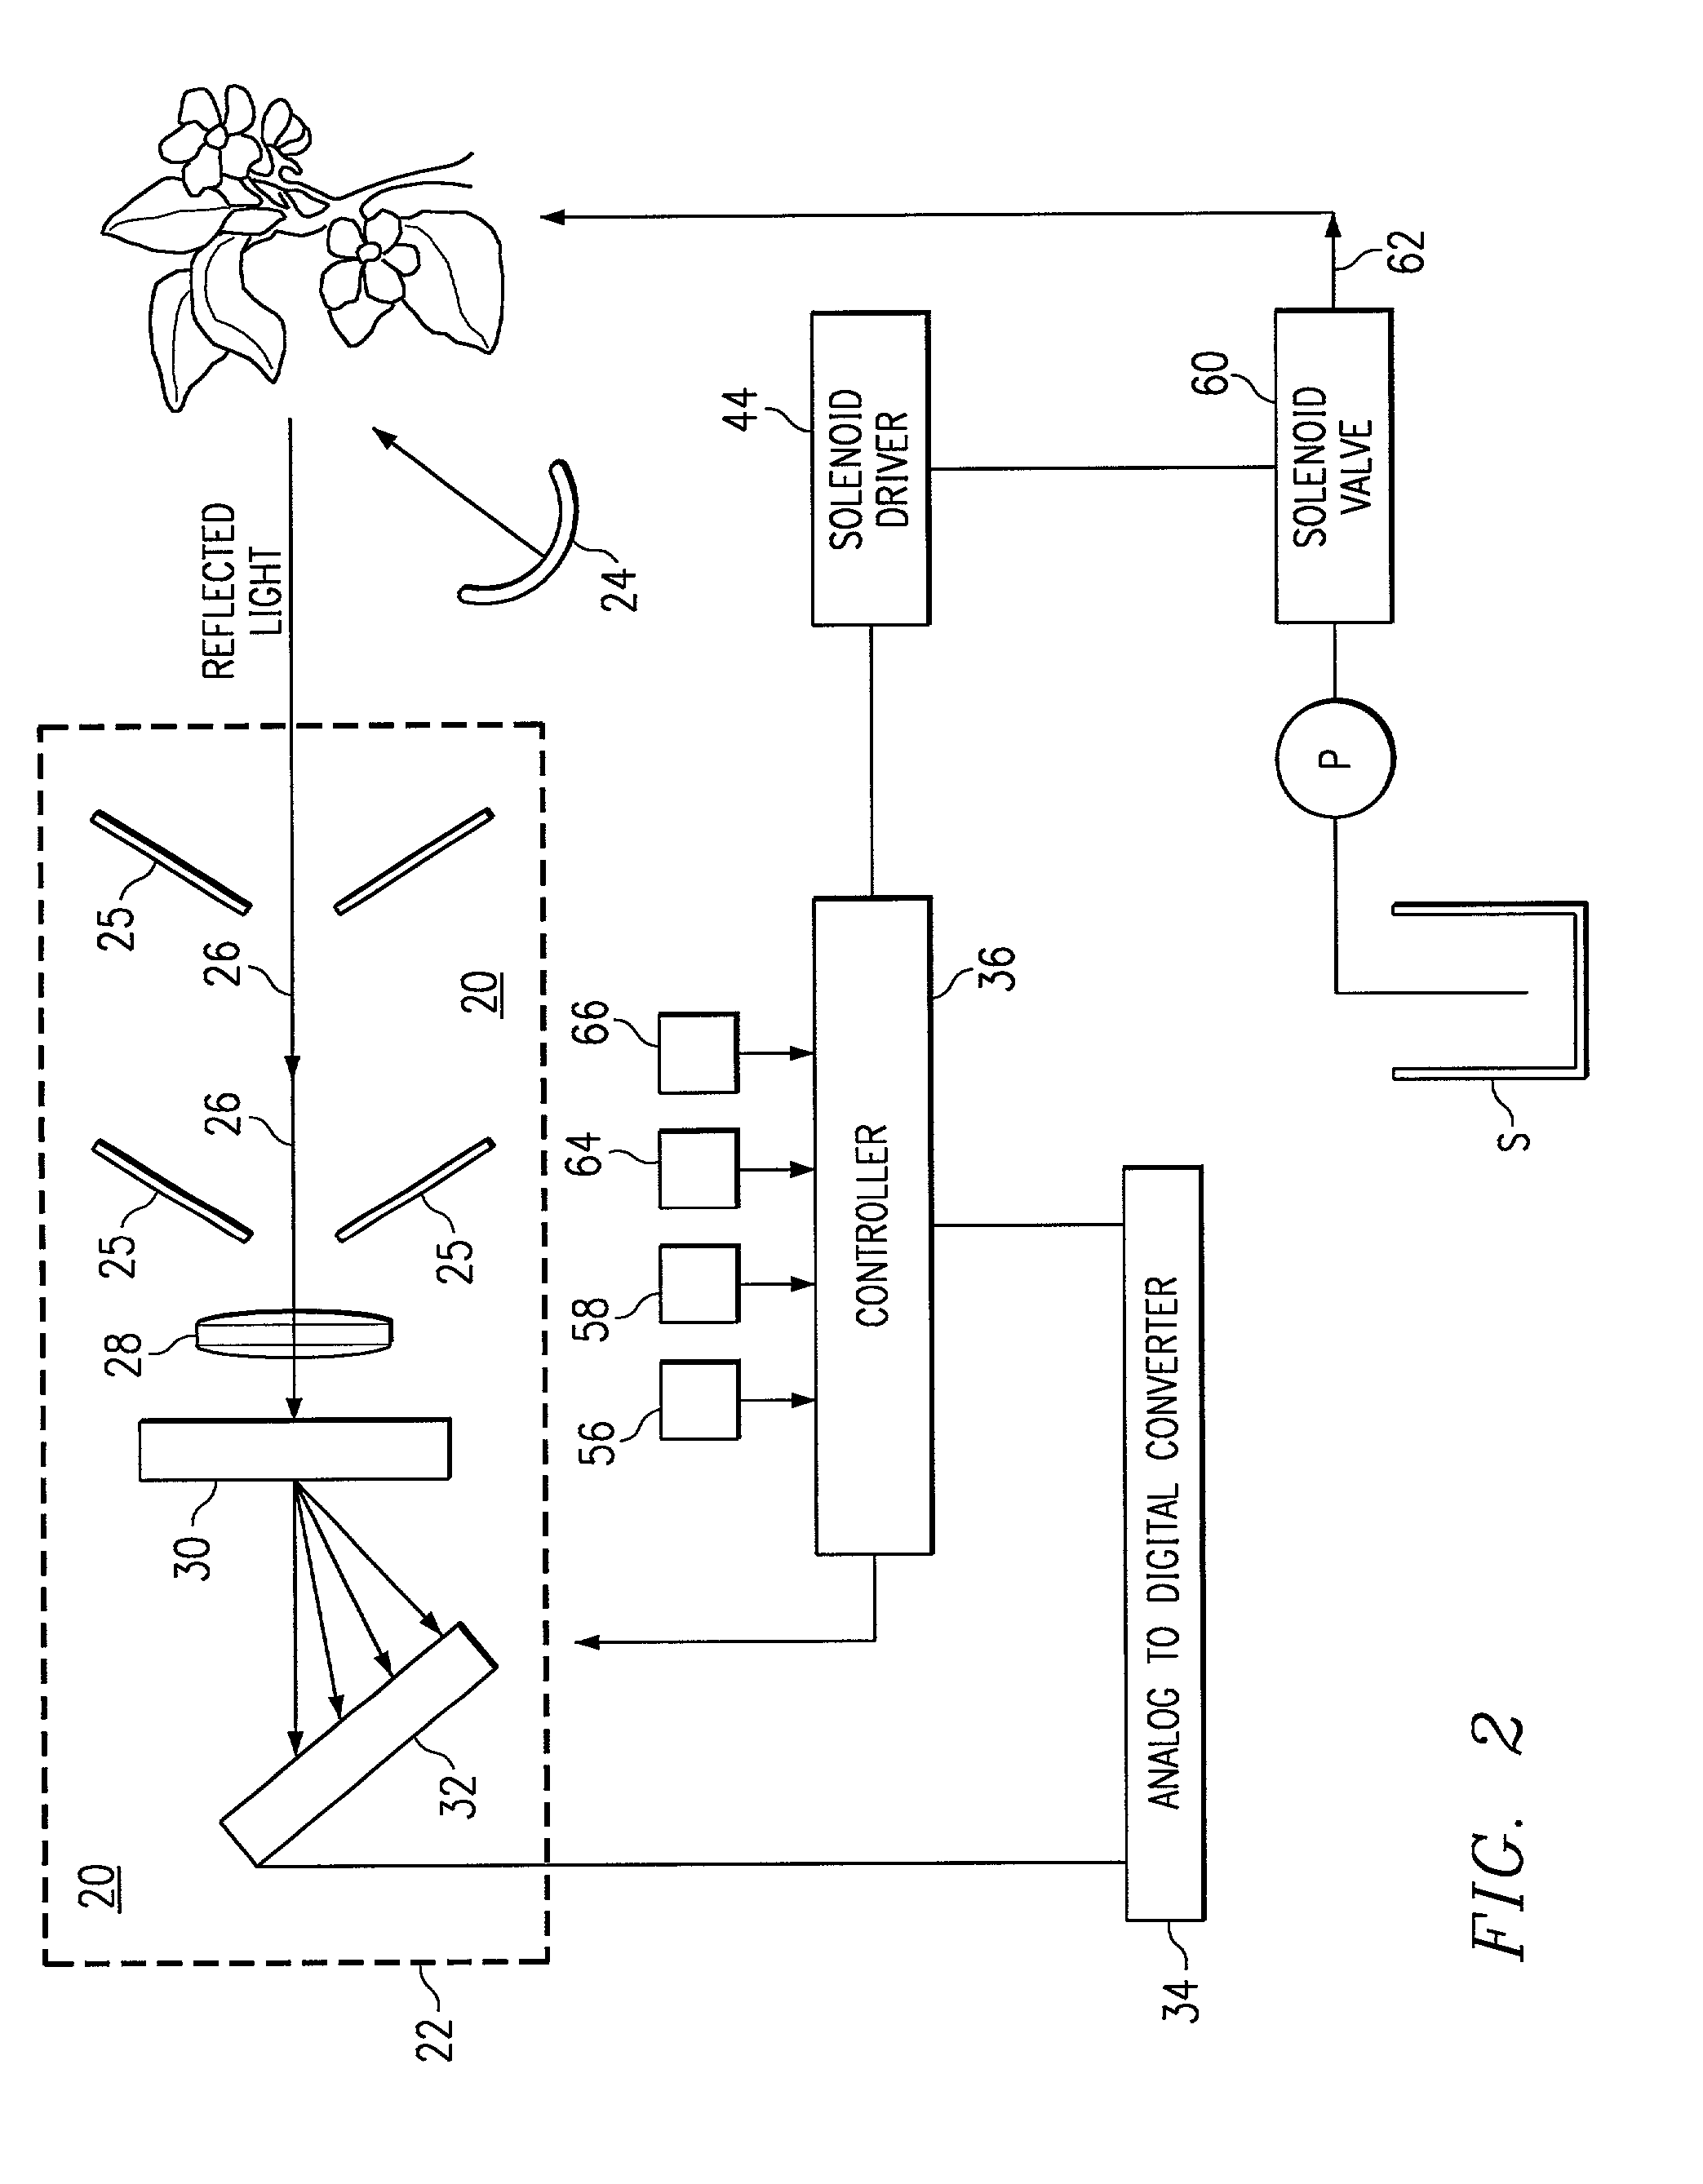 Digital spectral identifier-controller and related methods